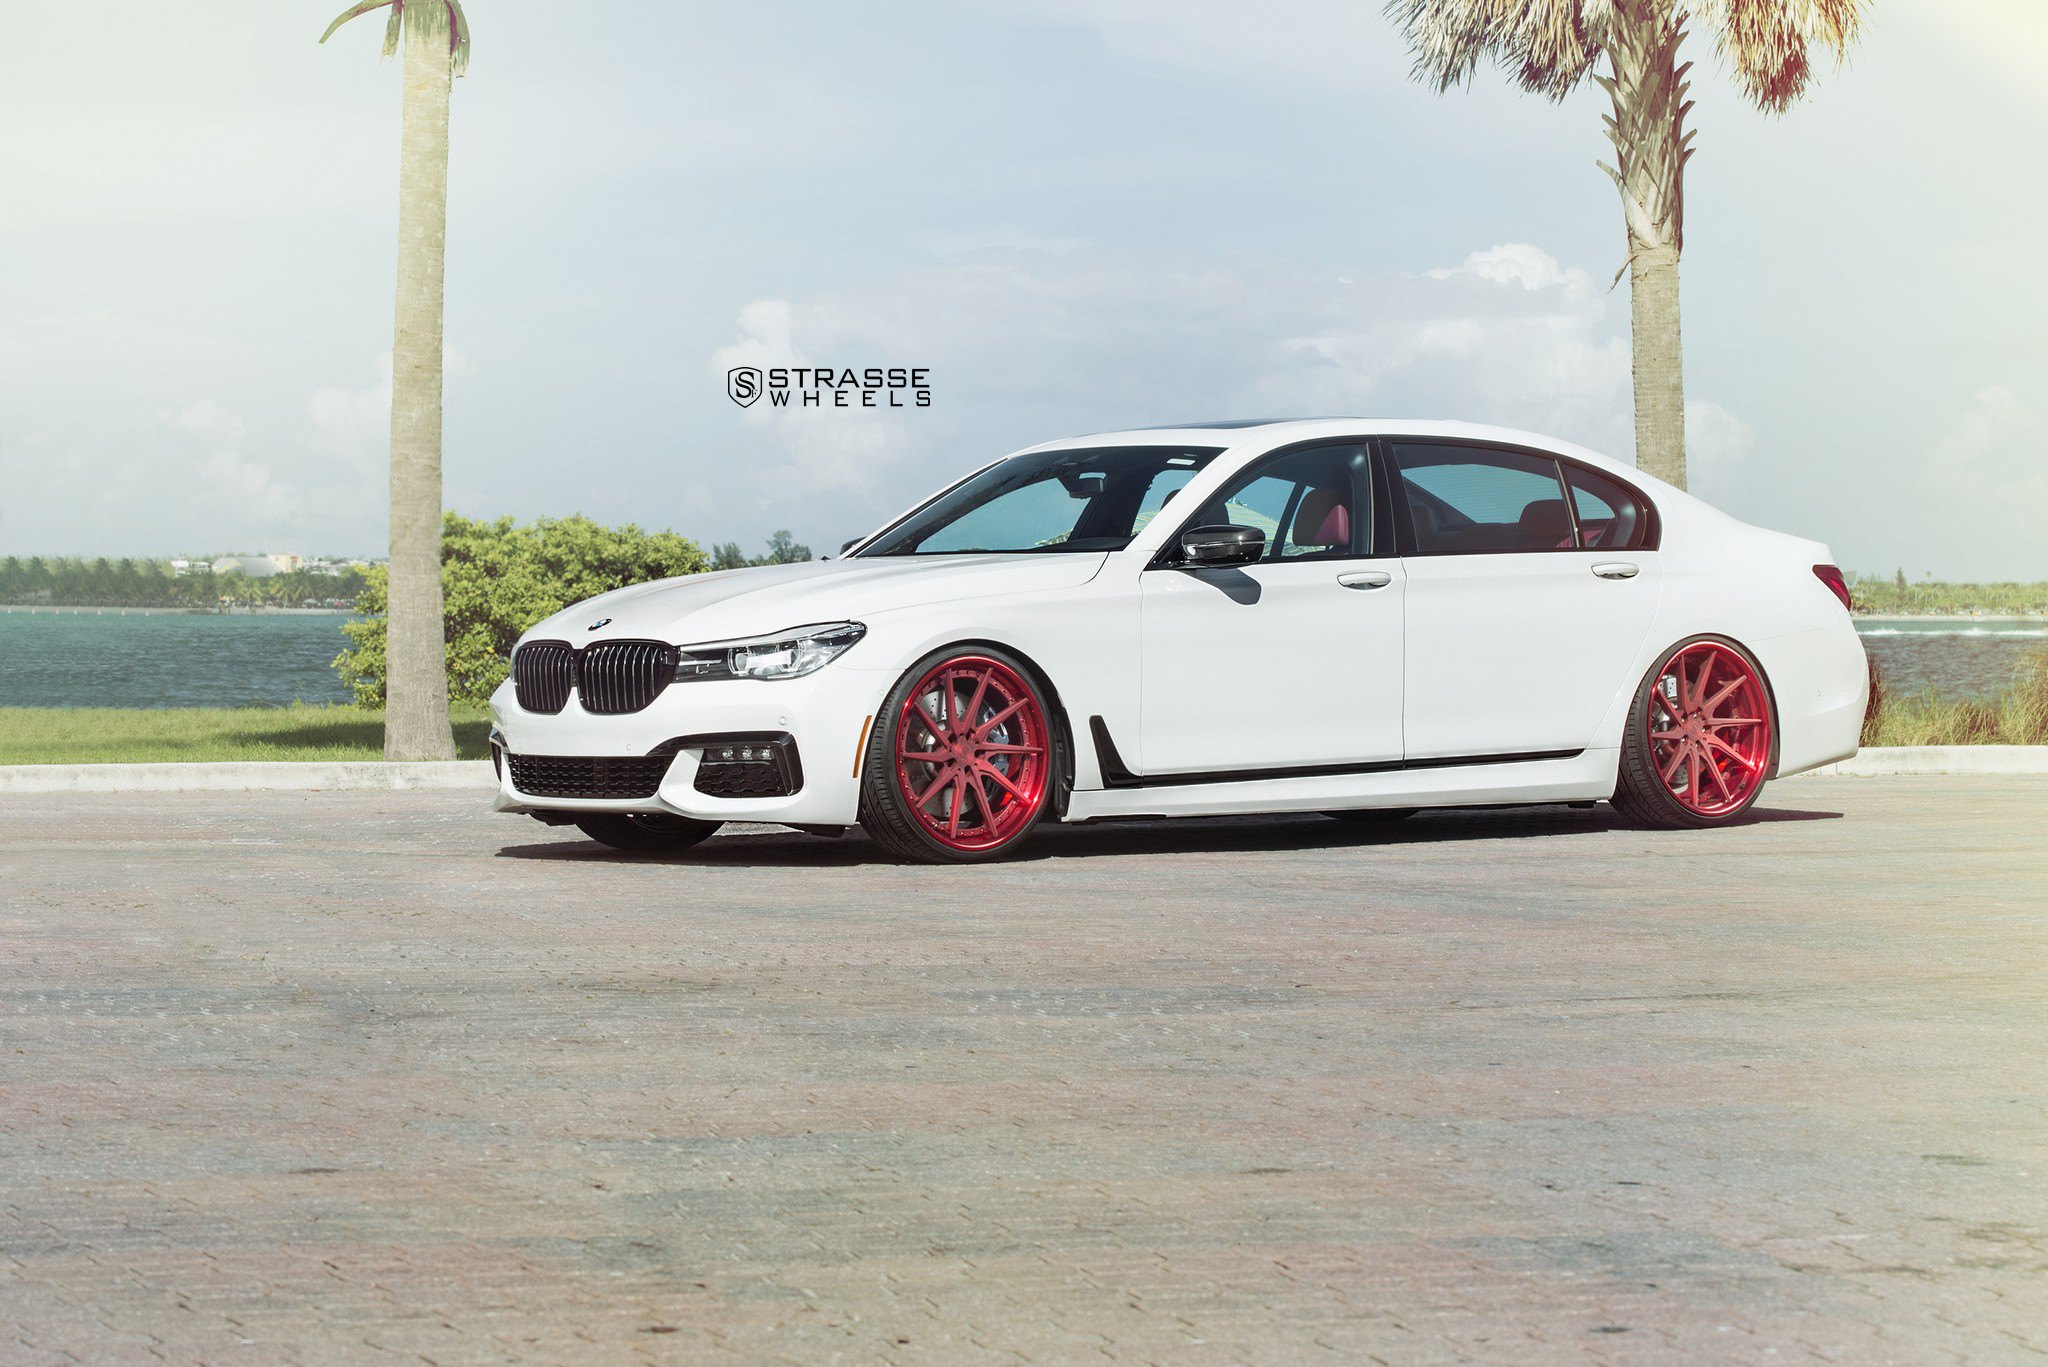 Aftermarket Side Skirts on White BMW 7-Series - Photo by Strasse Forged